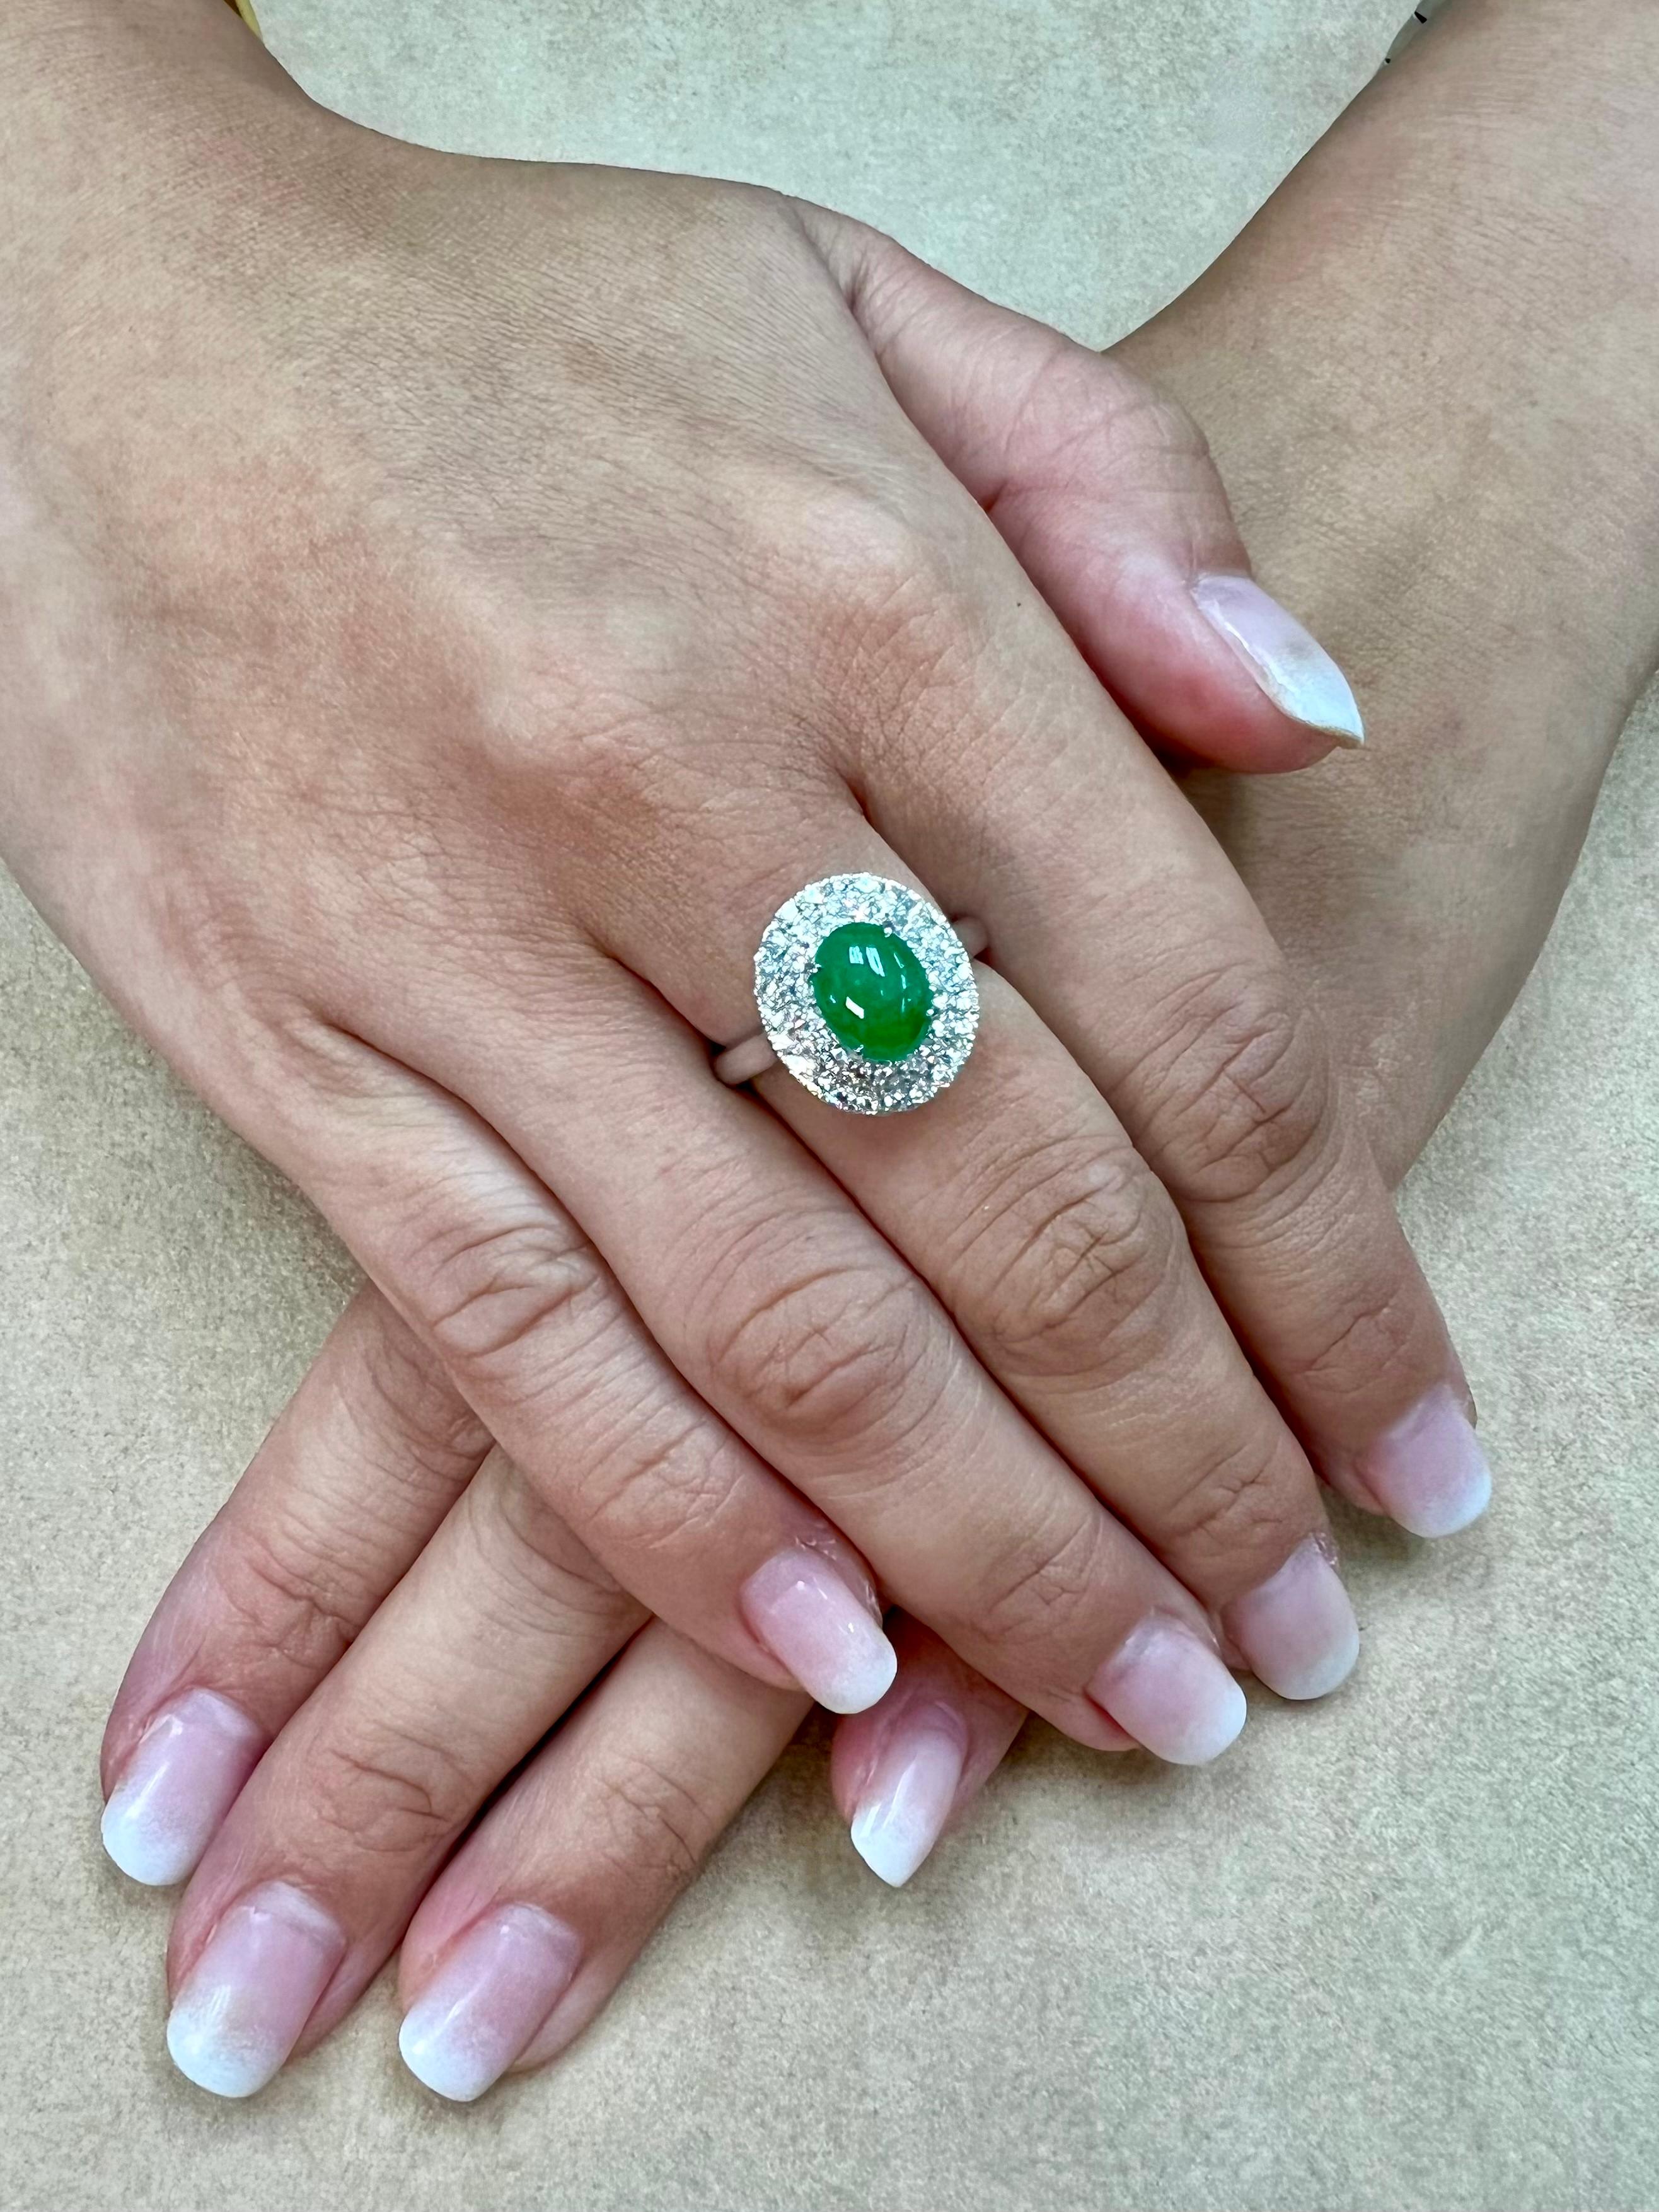 Please check out the HD video. Here is a bright apple green oval cabochon jade and diamond cocktail ring. This ring looks better in person! It is certified as natural jadeite jade with no treatment or enhancement. The ring is set in 18k white gold